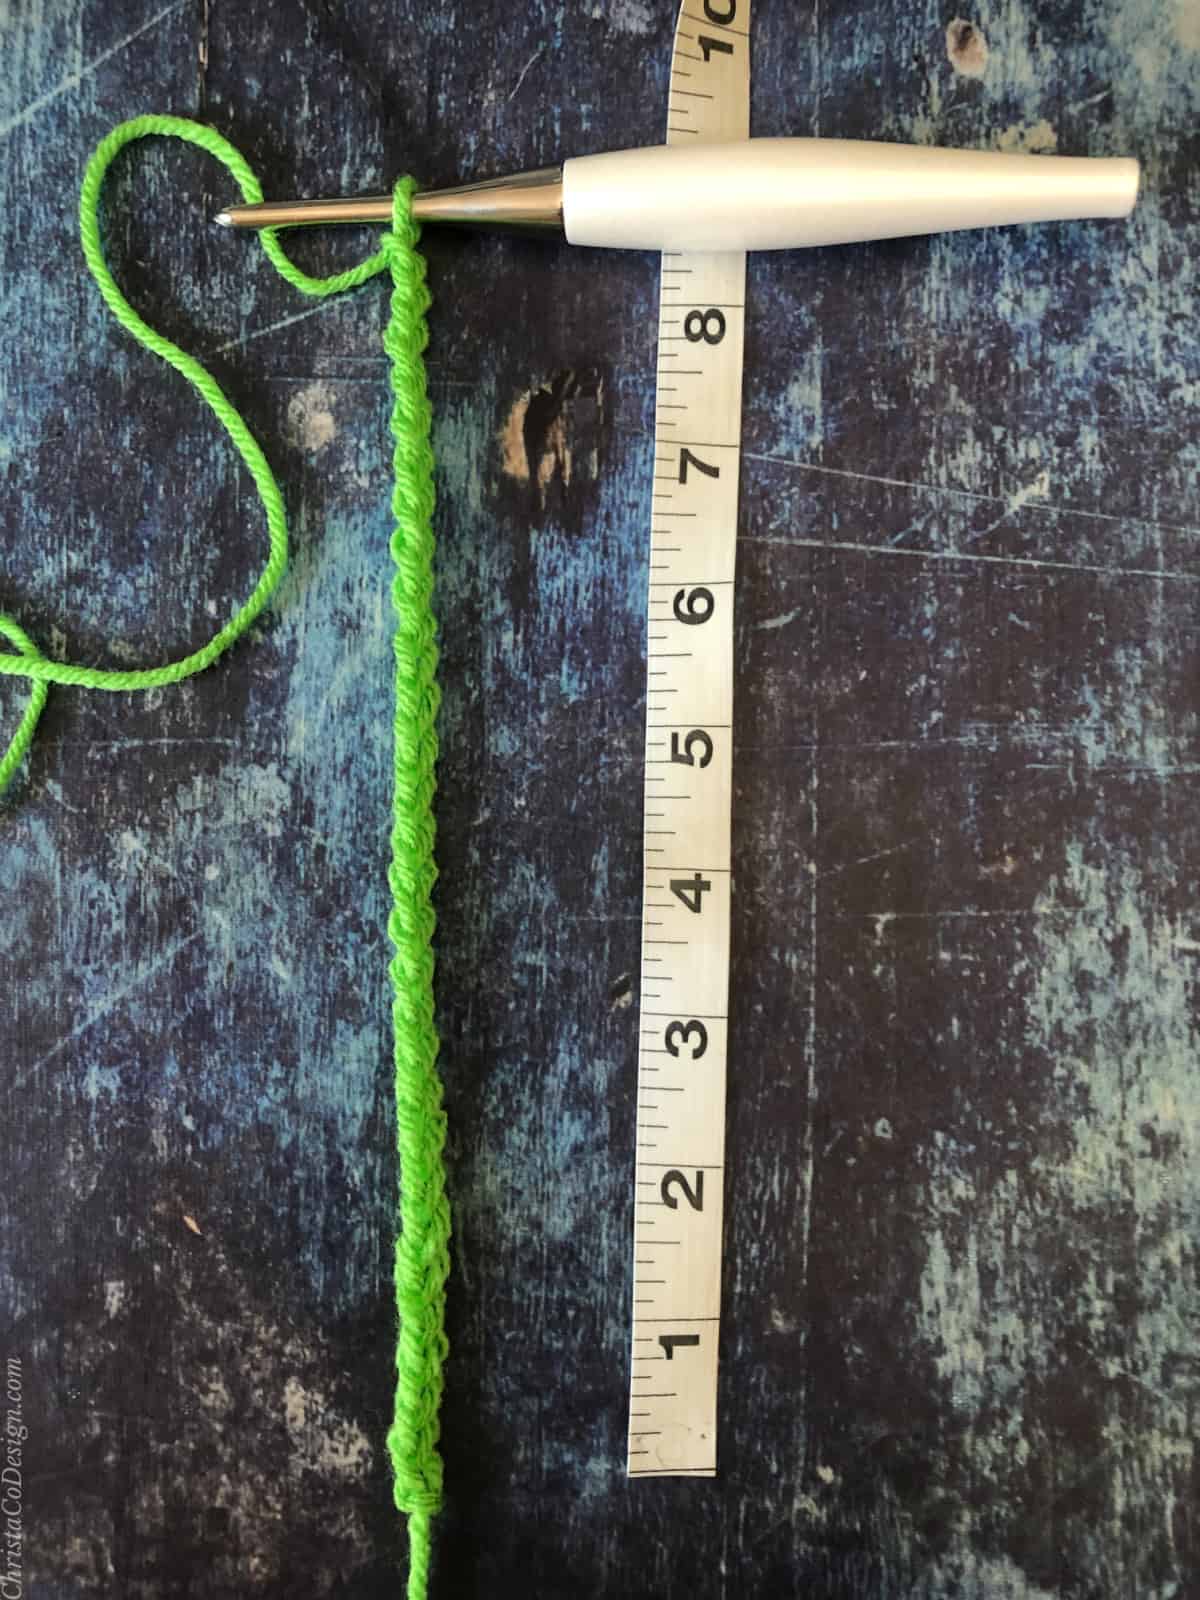 Green chain with measuring tape at 8."